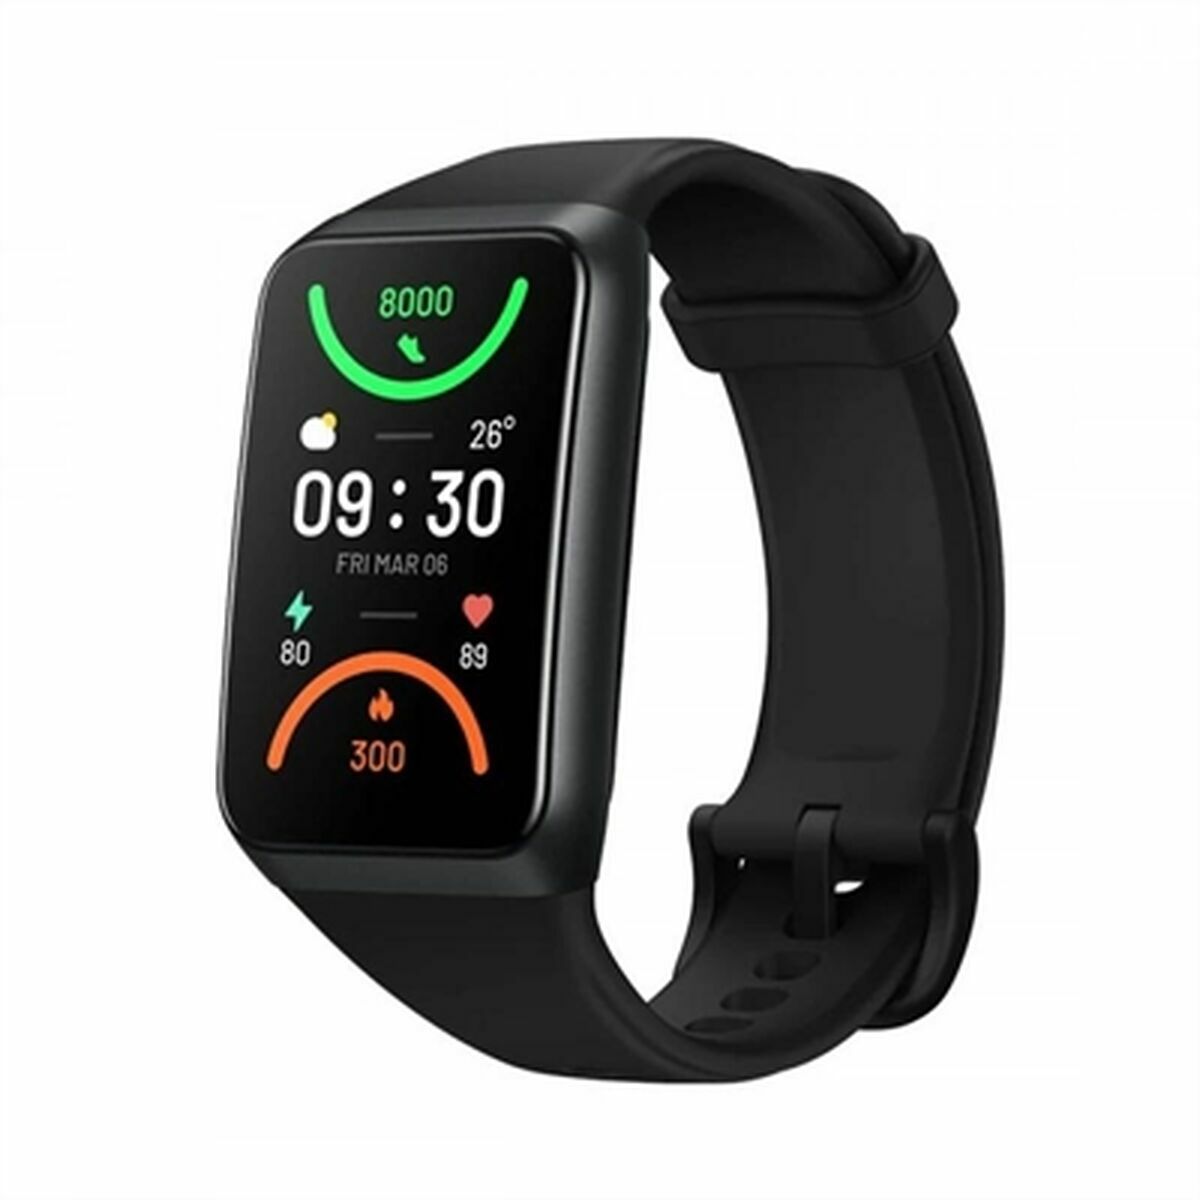 Smartwatch Oppo Band 2 1,57" Black, Oppo, Electronics, smartwatch-oppo-band-2-1-57-black-1, Brand_Oppo, category-reference-2609, category-reference-2617, category-reference-2634, category-reference-t-19653, Condition_NEW, original gifts, Price_50 - 100, telephones & tablets, Teleworking, wifi y bluetooth, RiotNook